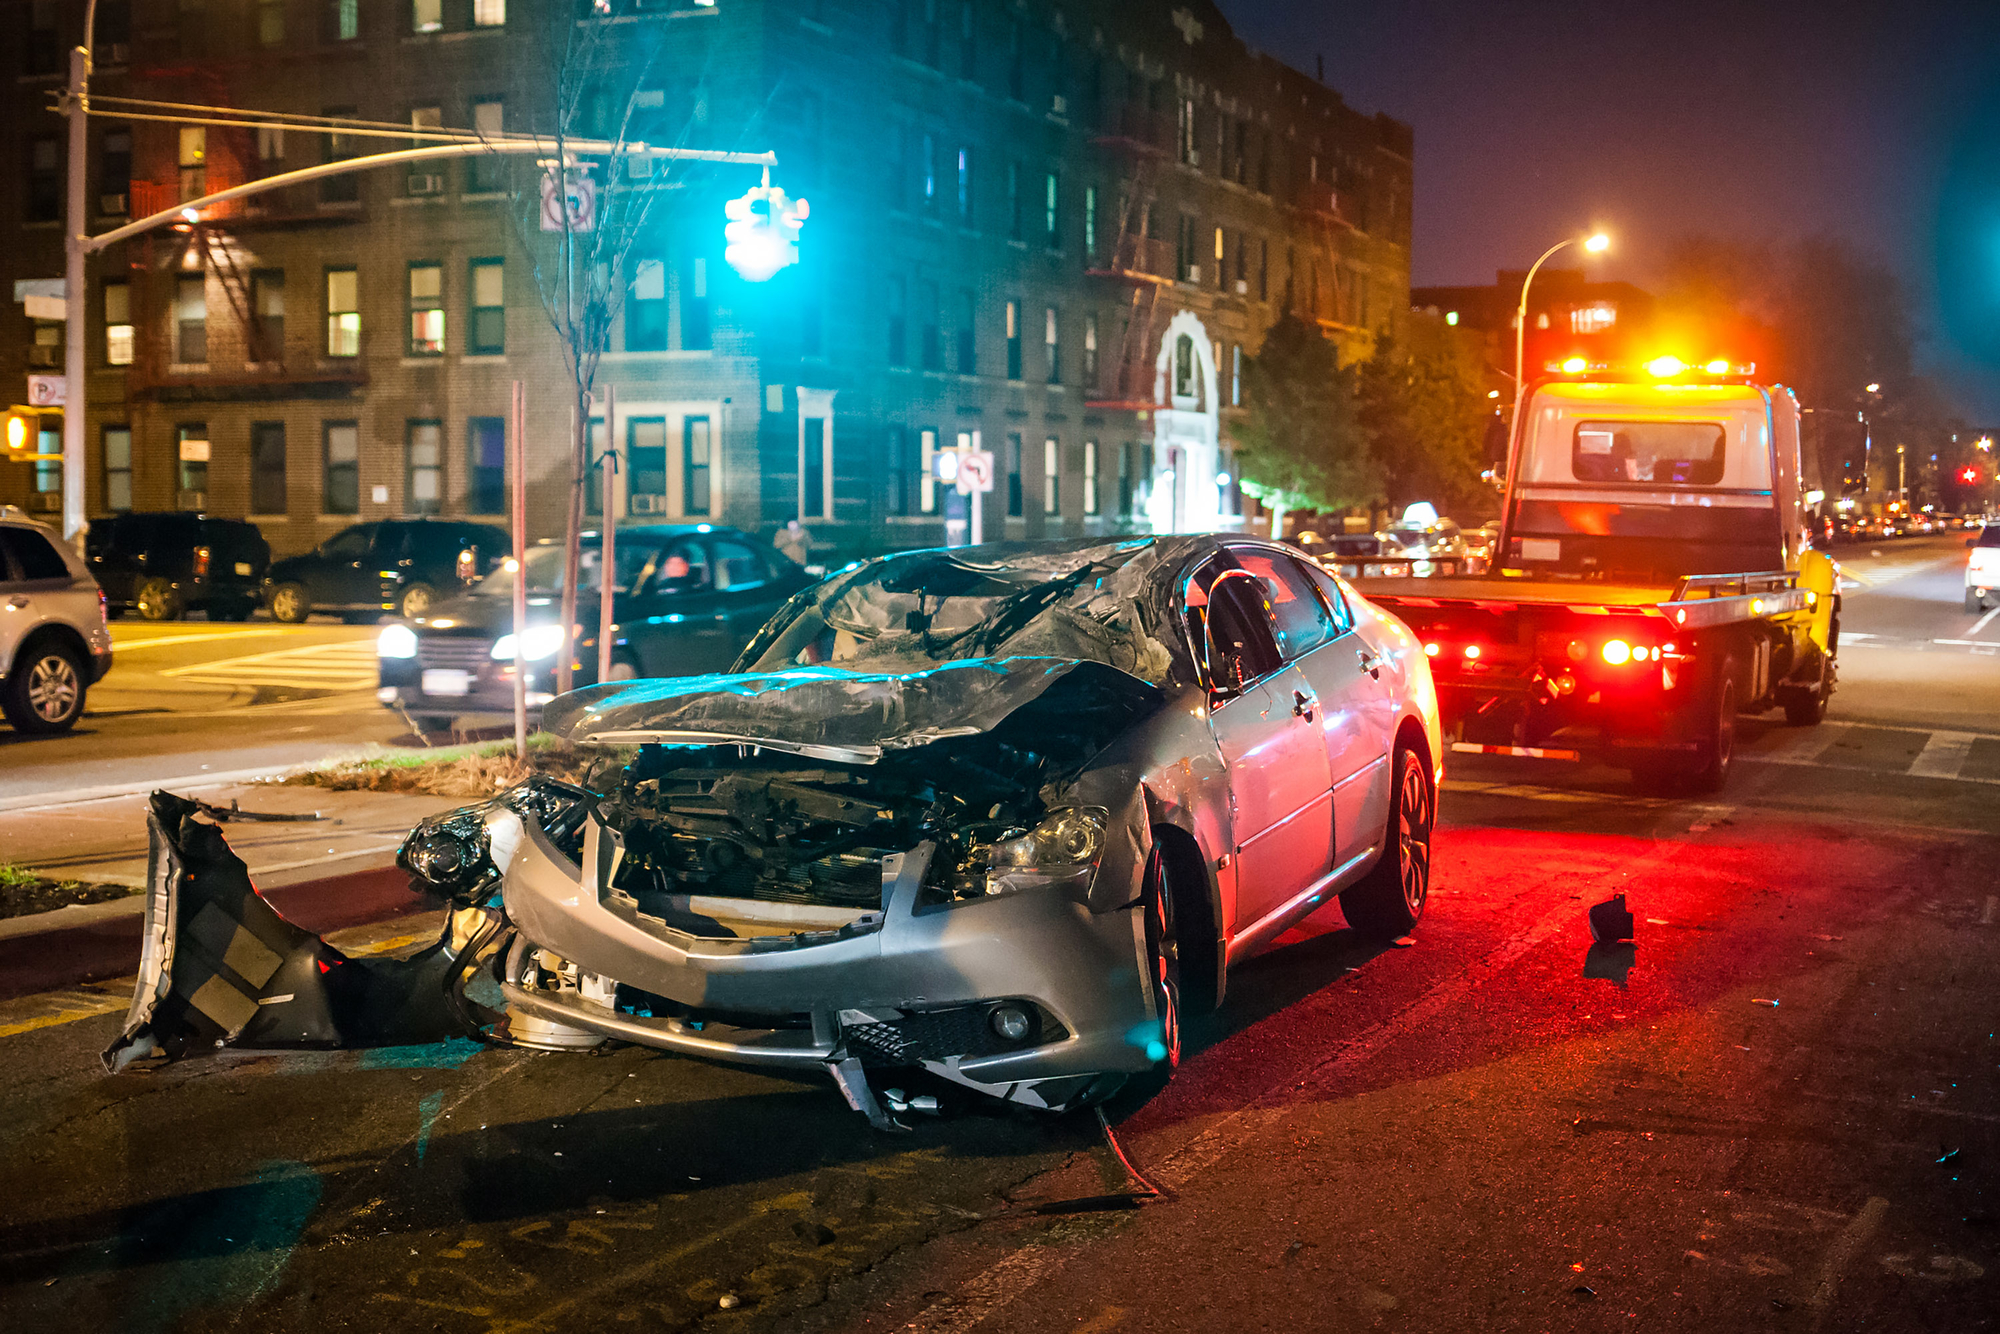 Do I need an Attorney After a Car Crash?